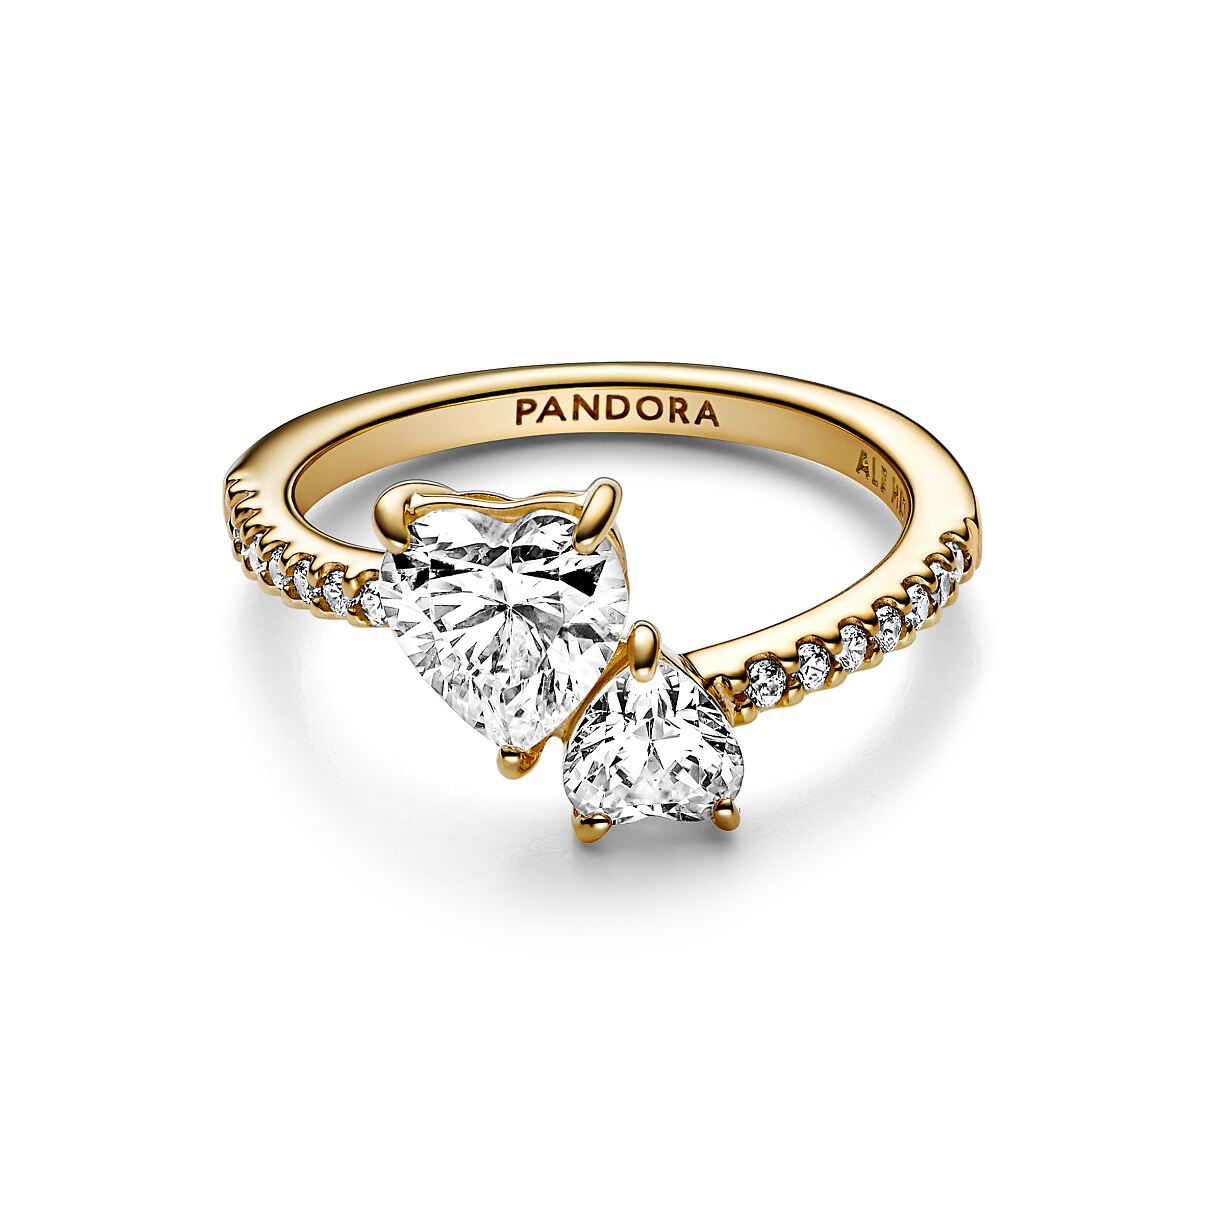 Pandora_Ring_14k Gold plated_Clear Cubic Zirconia_161198C01 (2)